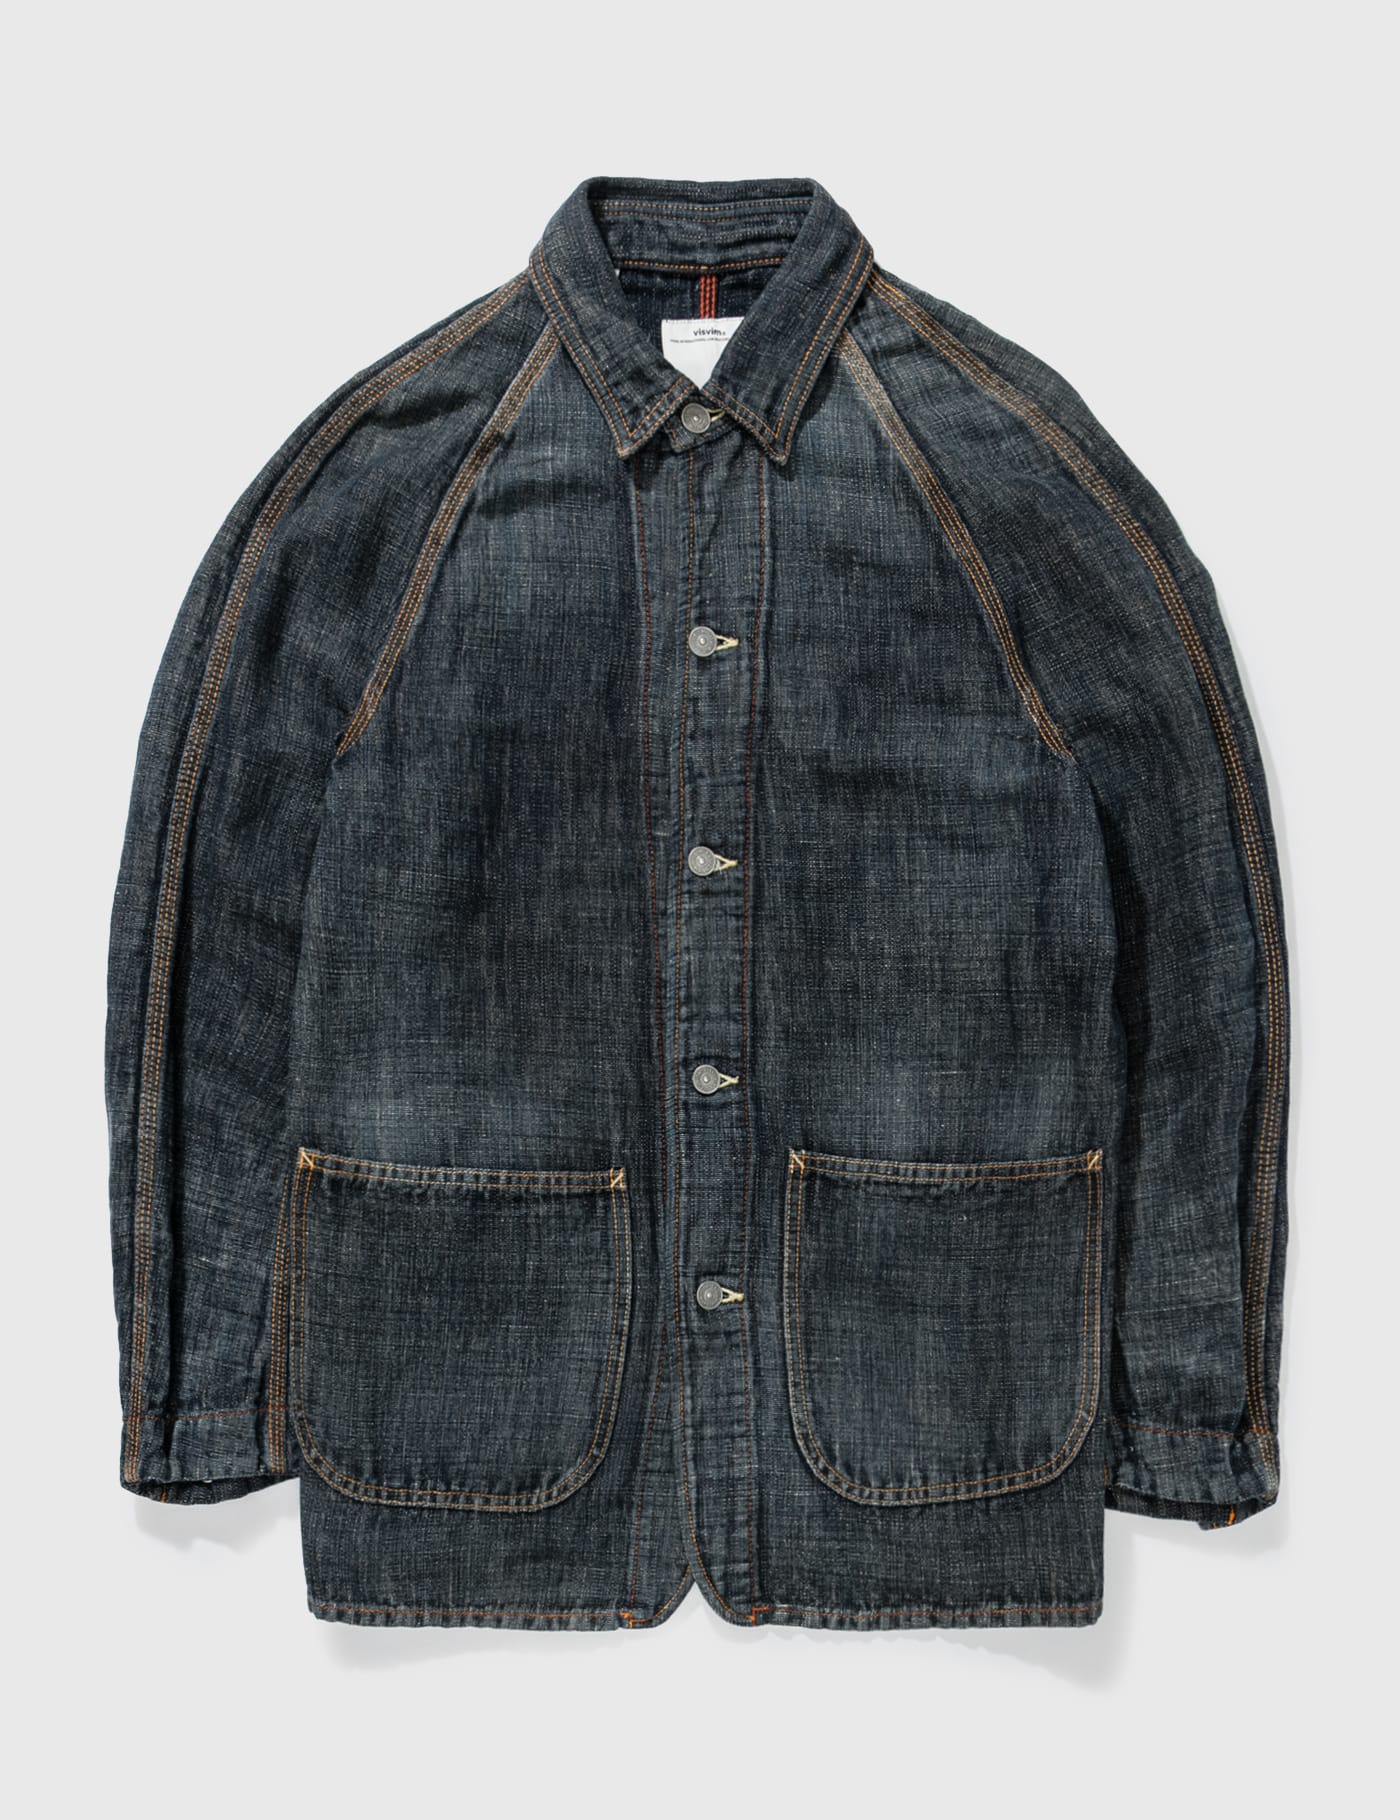 Visvim | HBX - Globally Curated Fashion and Lifestyle by Hypebeast